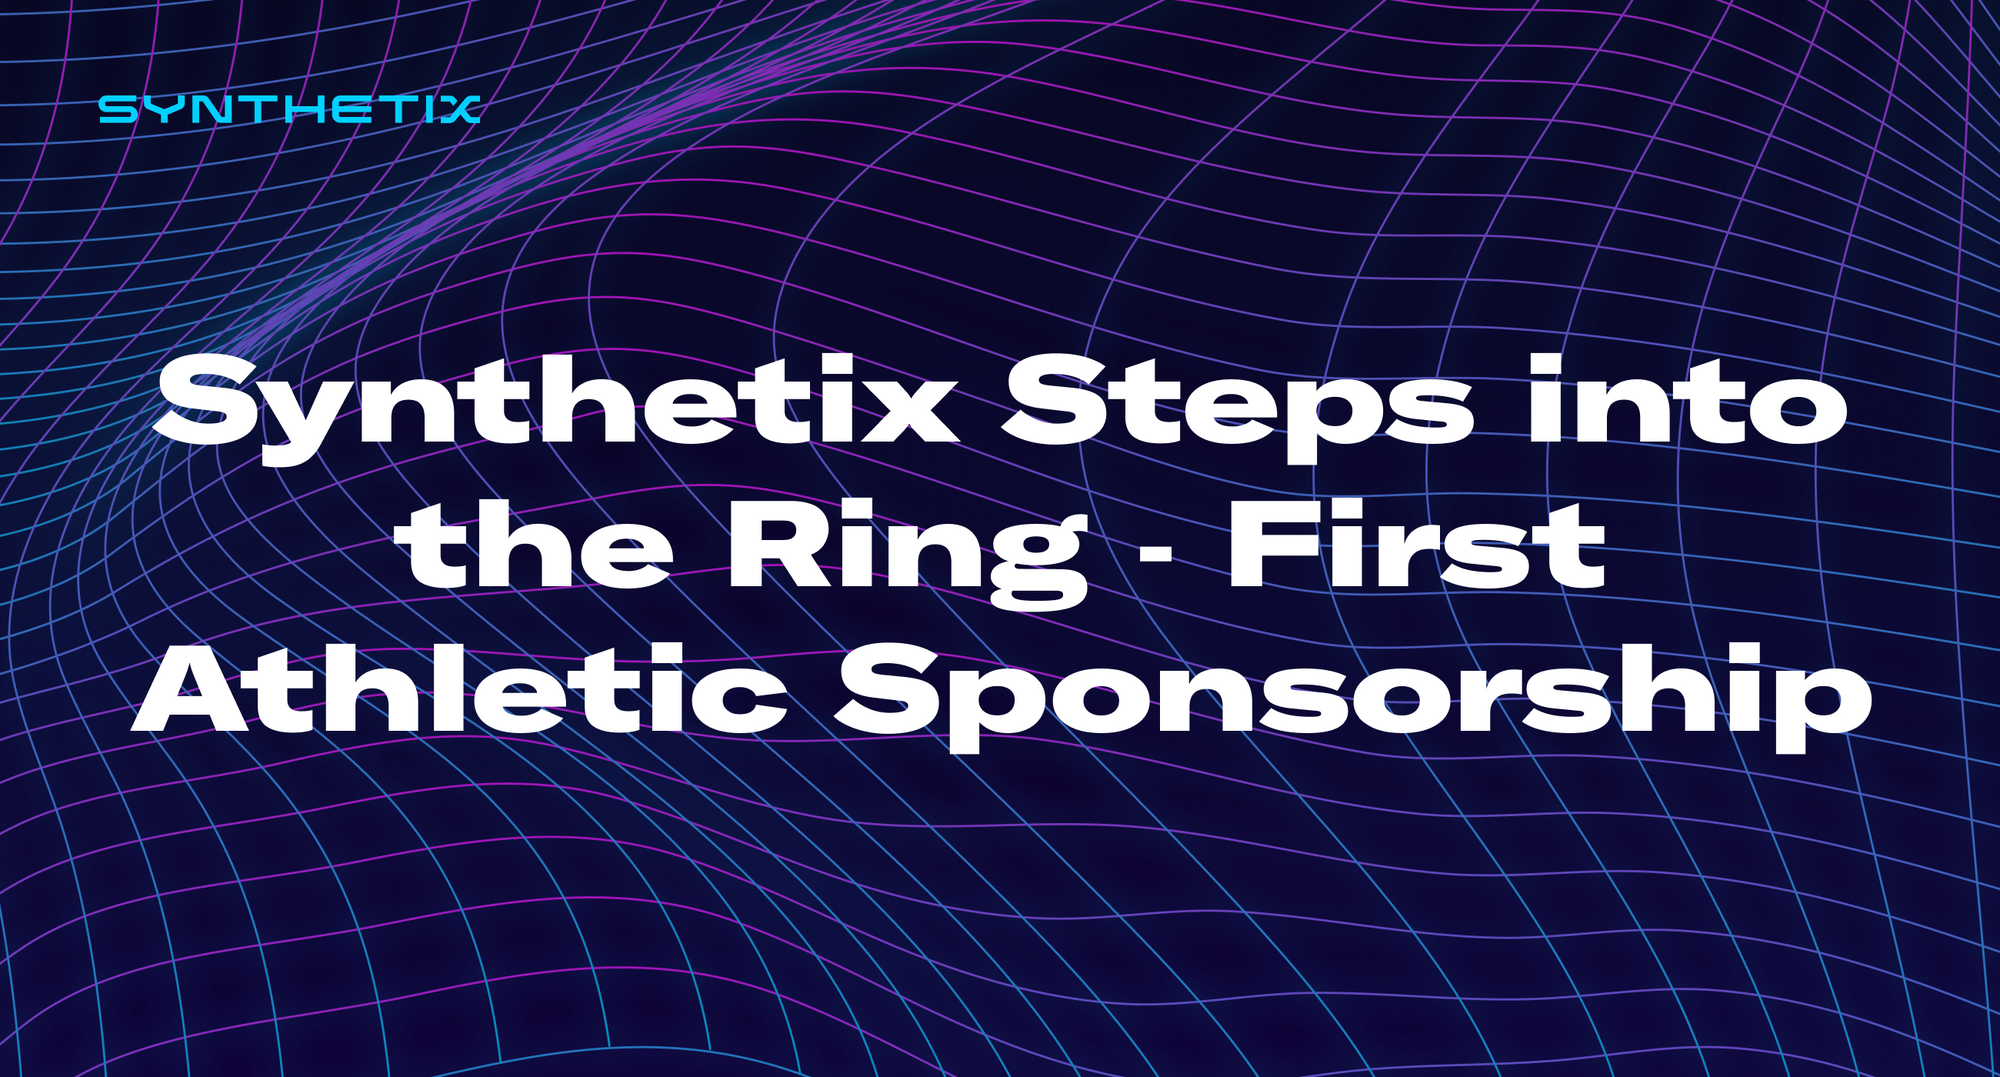 Synthetix Steps into the Ring - First Athletic Sponsorship